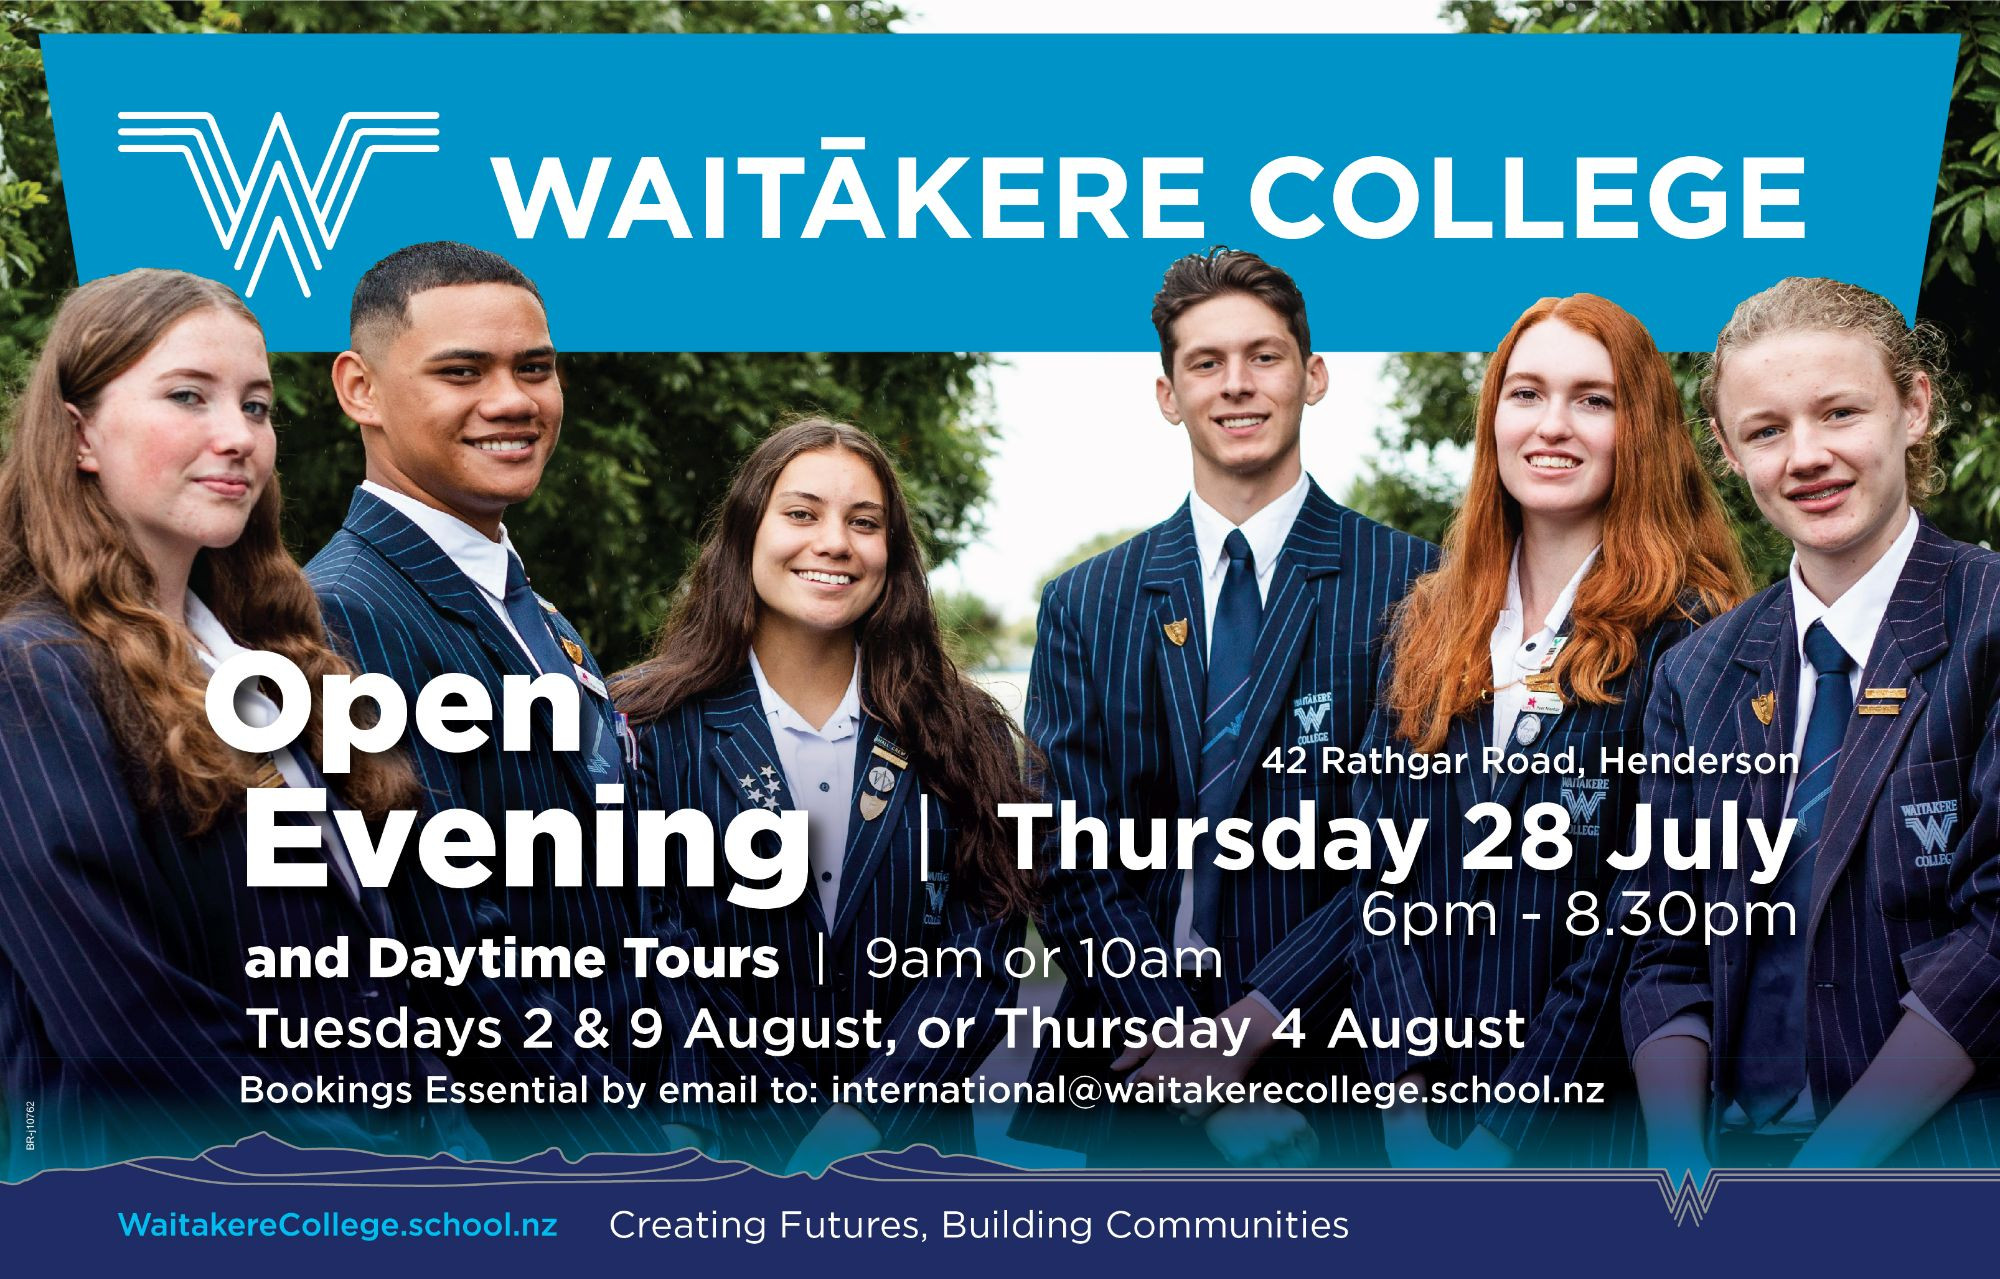 Our Open Evening and Daytime Tours